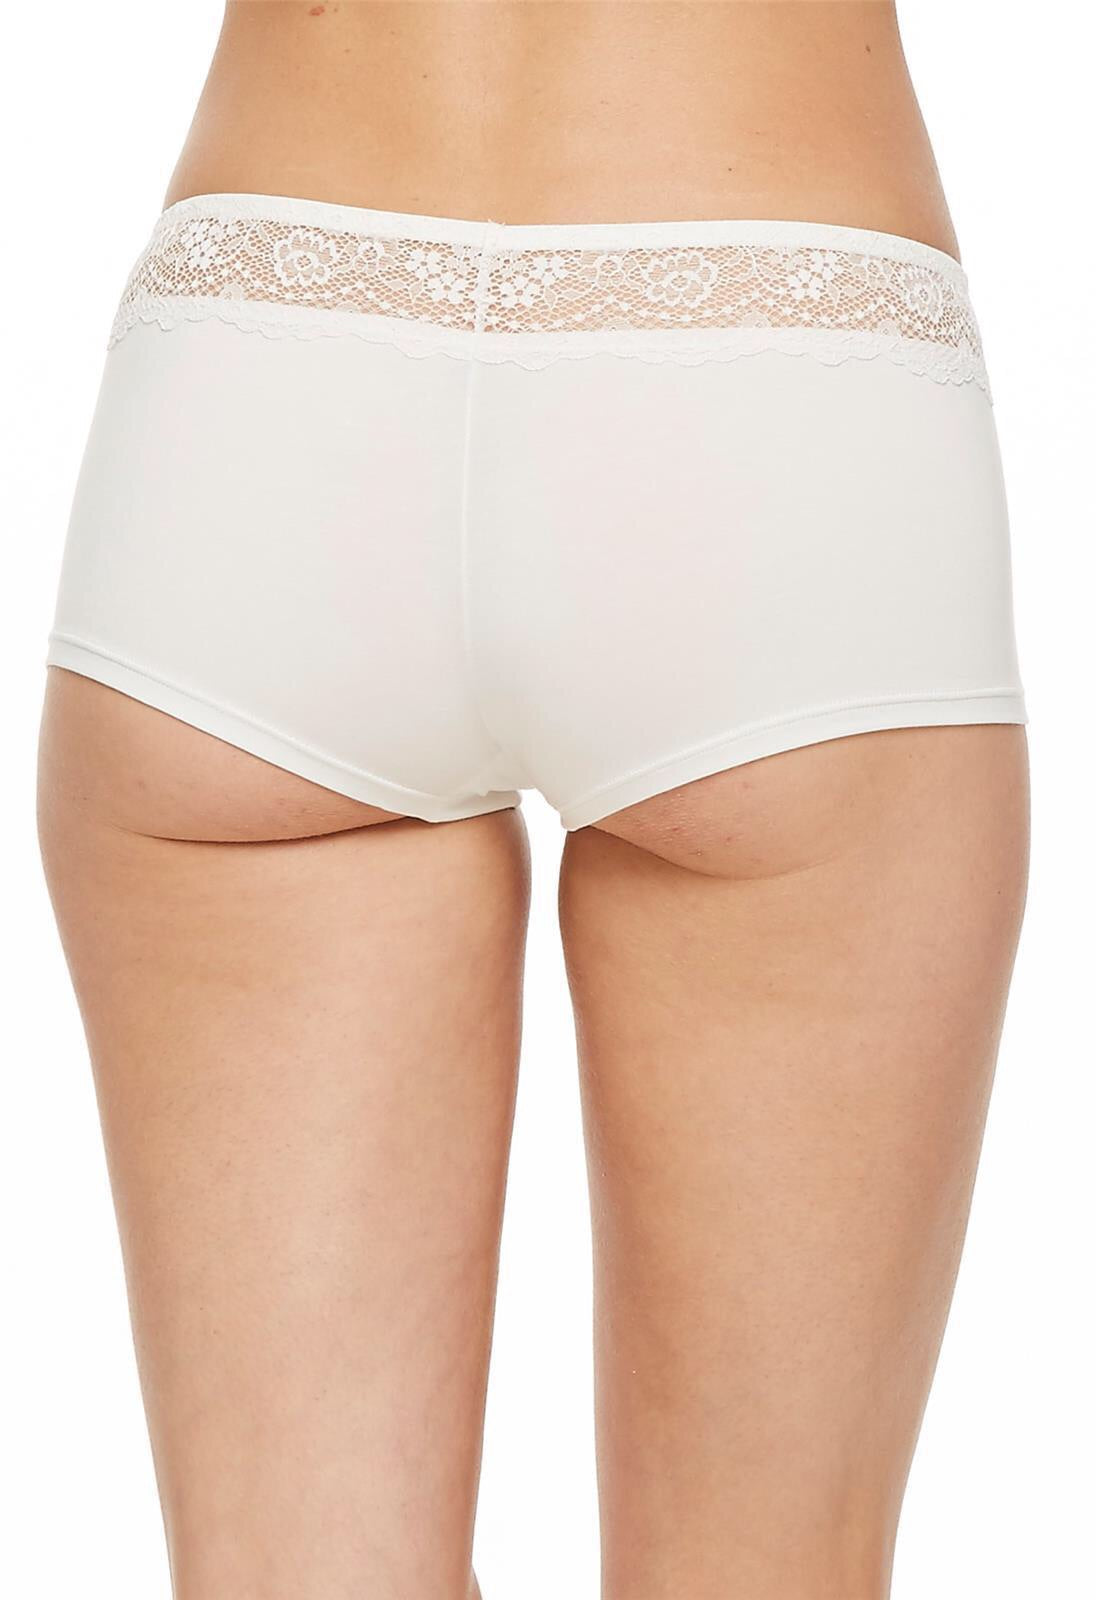 MONTELLE BODYBLISS BREEZE COLLECTION BOYSHORT IN IVORY